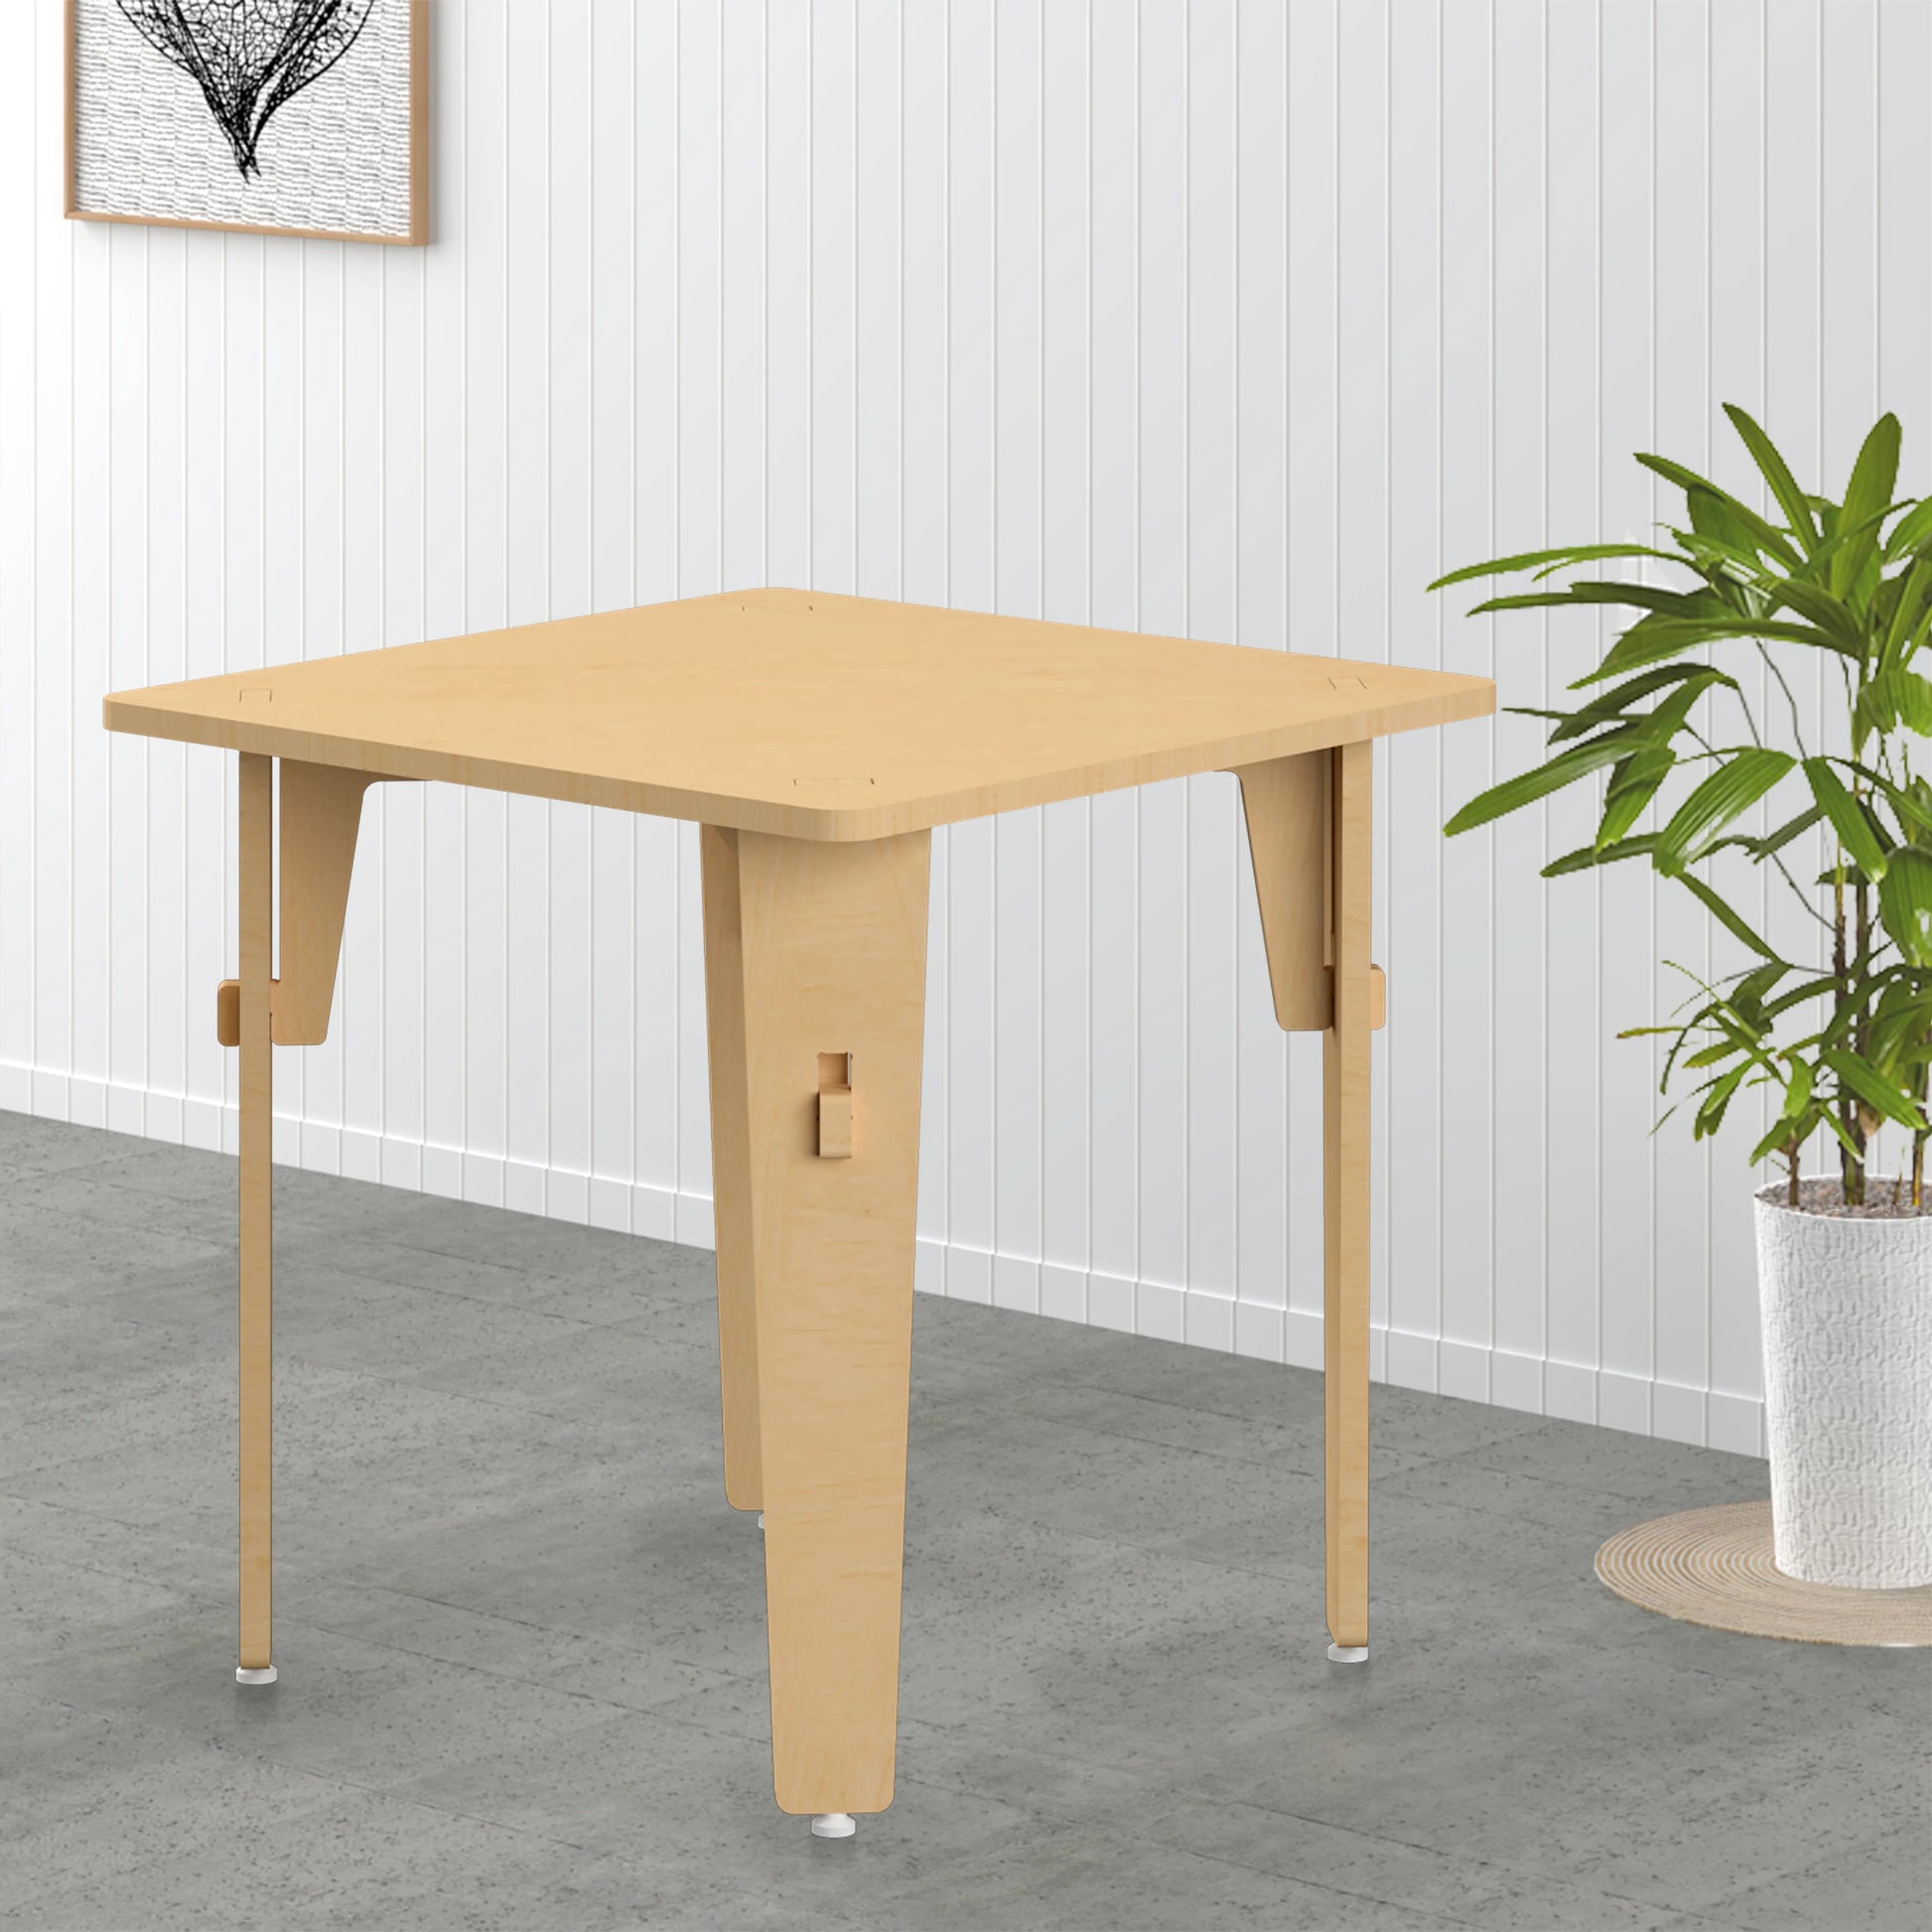 Buy Lime Fig Wooden Table - Natural (21 Inches) - SkilloToys.com